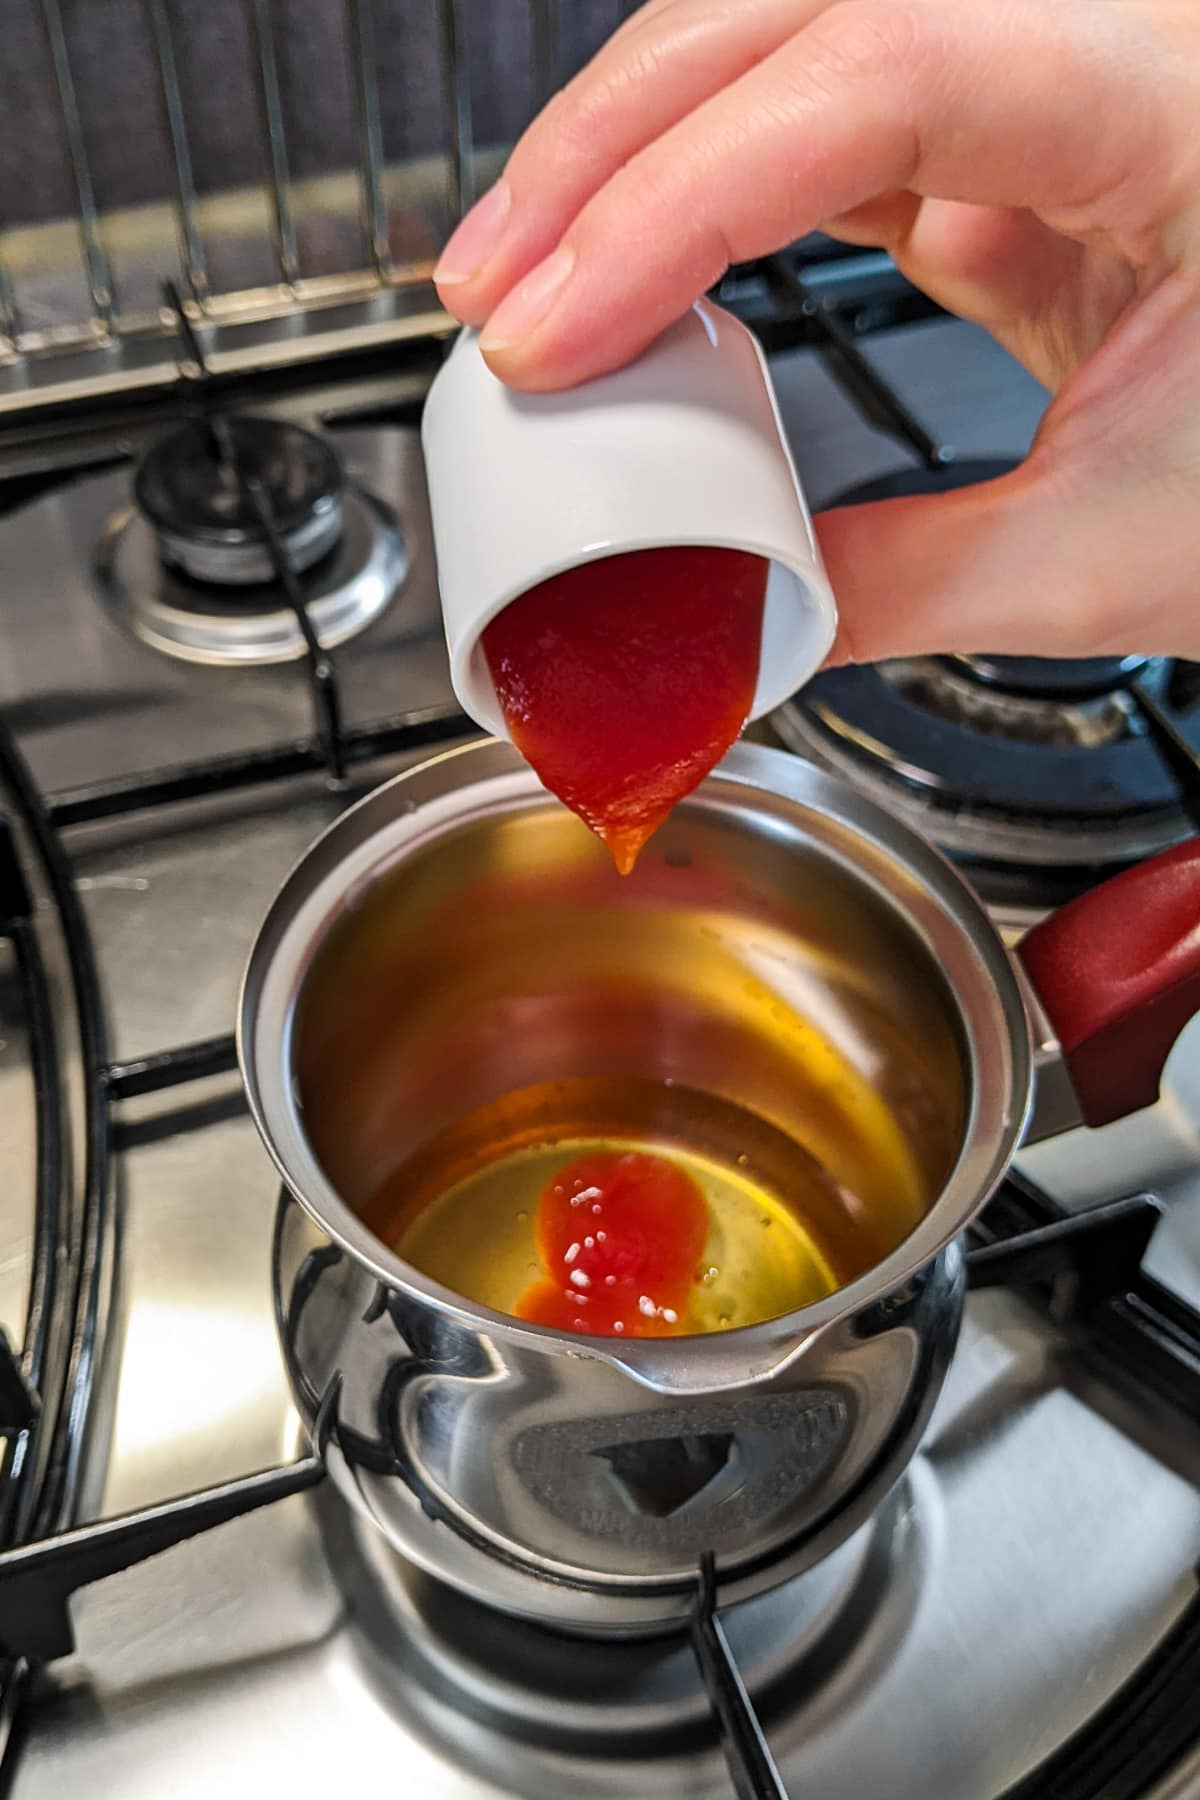 Pouring ketchup in a small sauce pan on the stove.